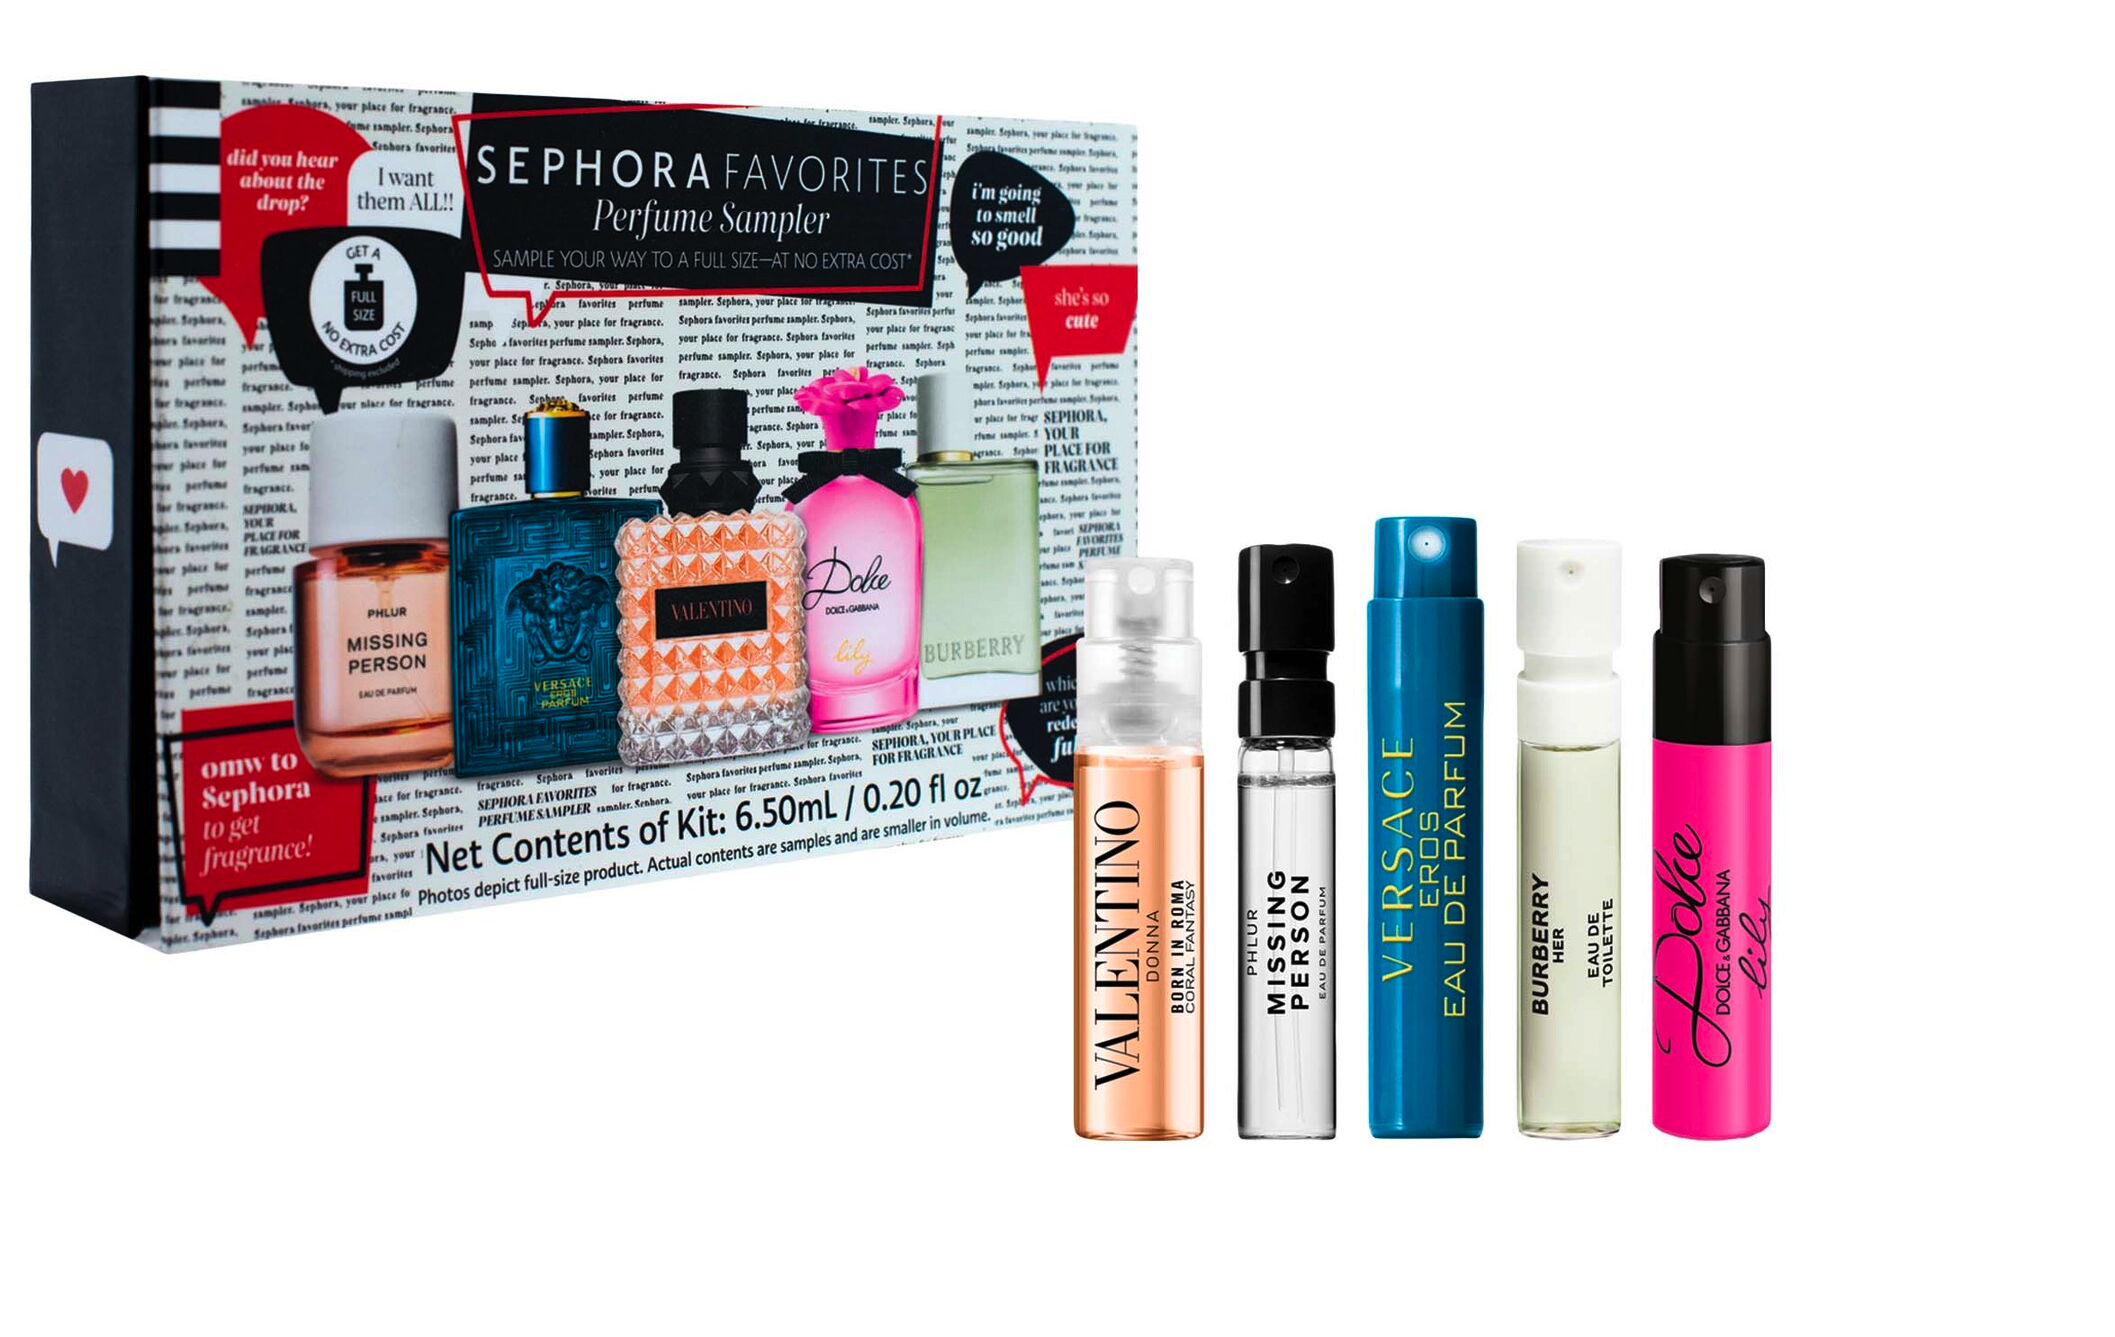 Sephora FREE Fragrance Gift Set with $45 purchase